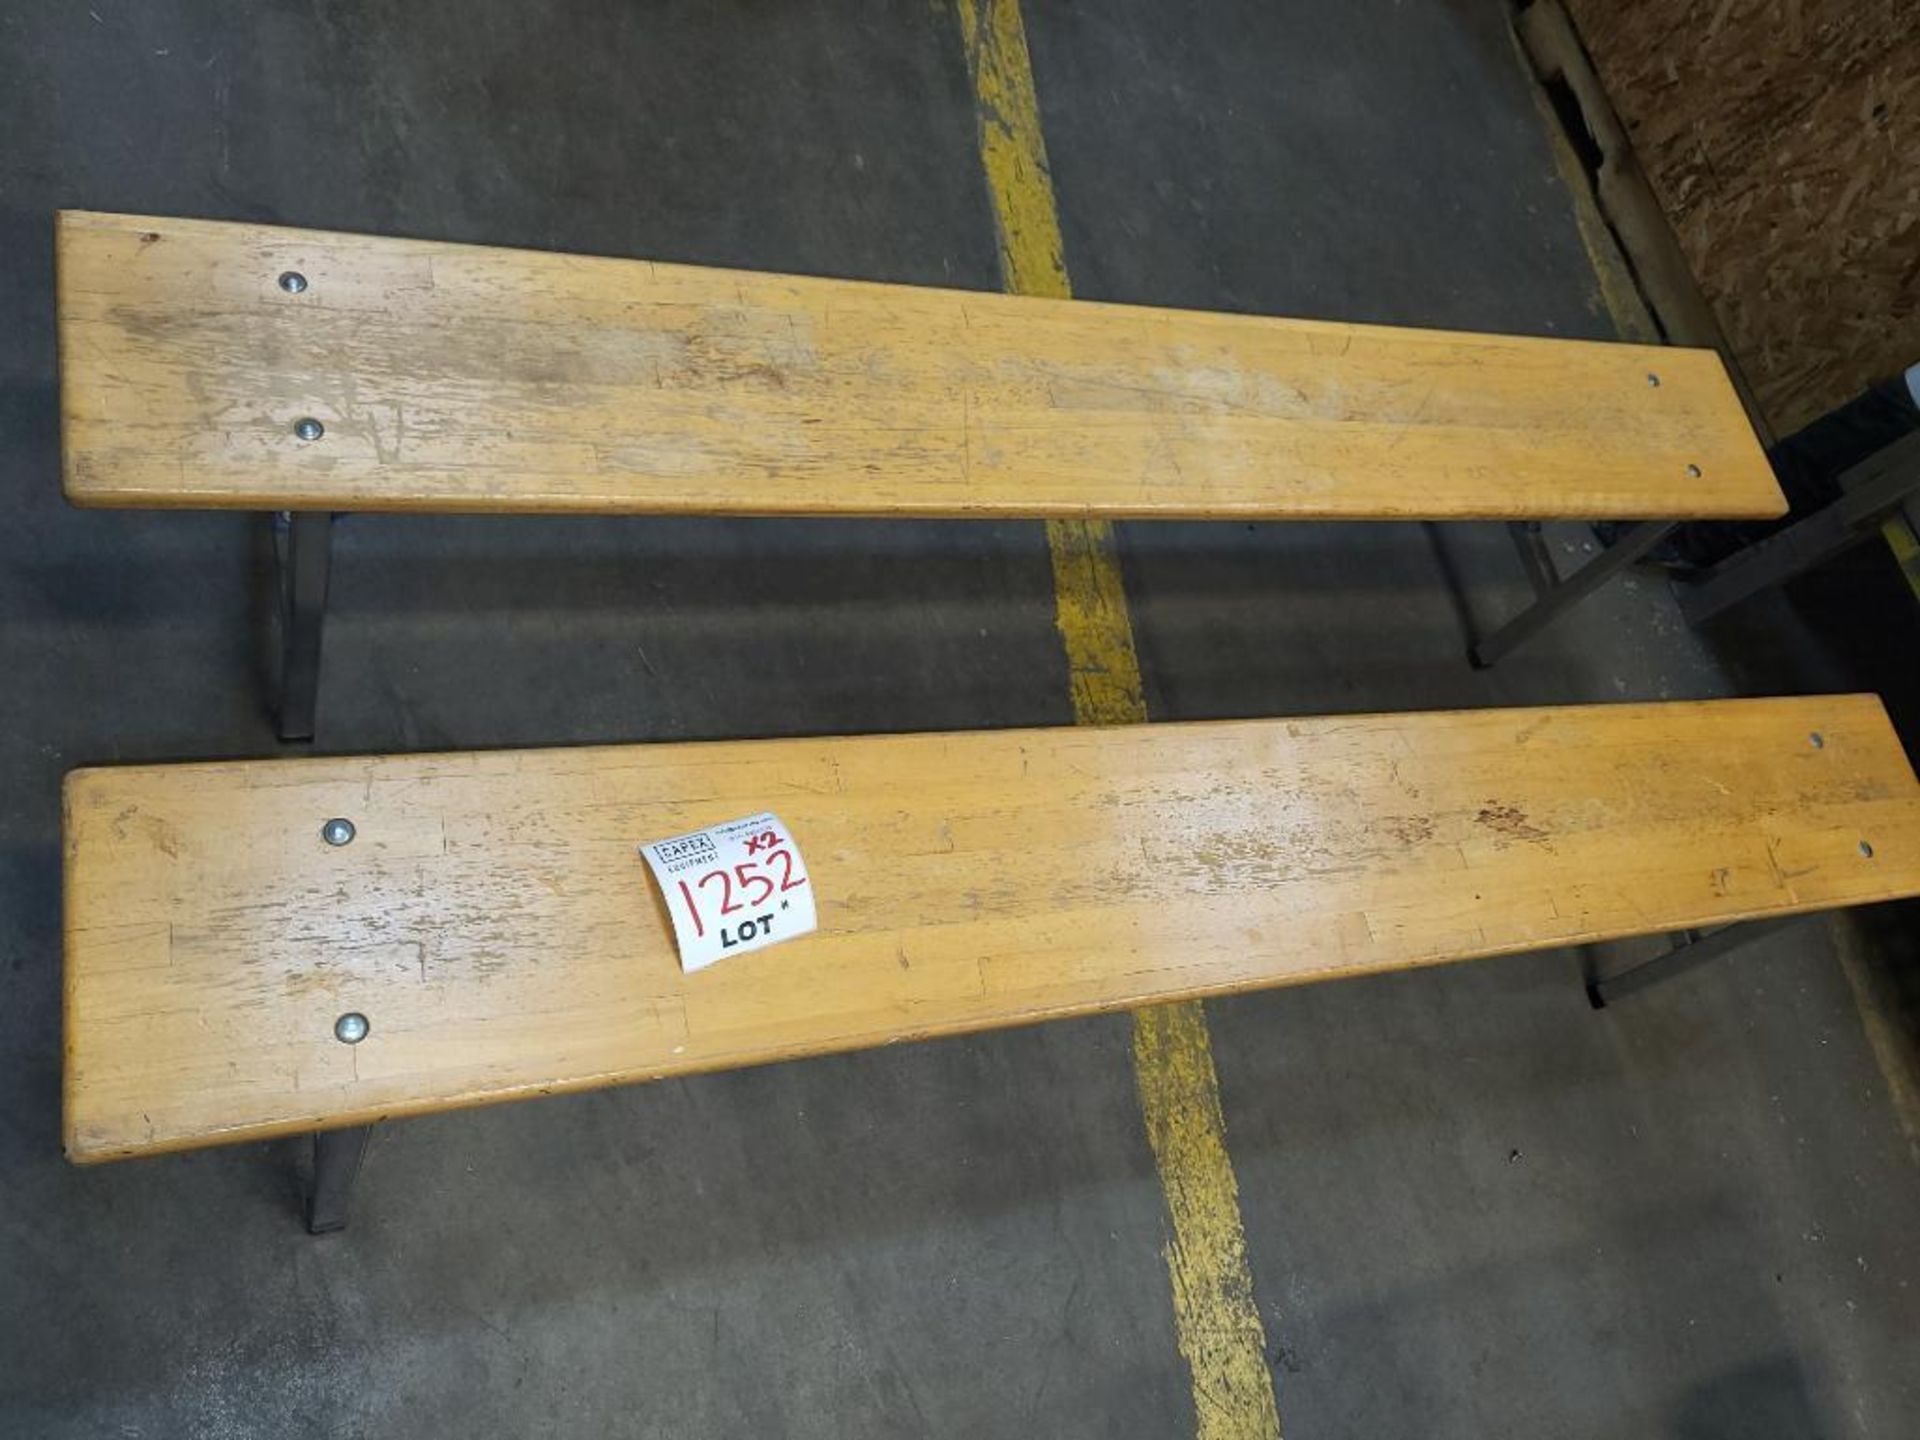 Lot Of 2 Wooden Benches 6 Feet Long - Image 2 of 2